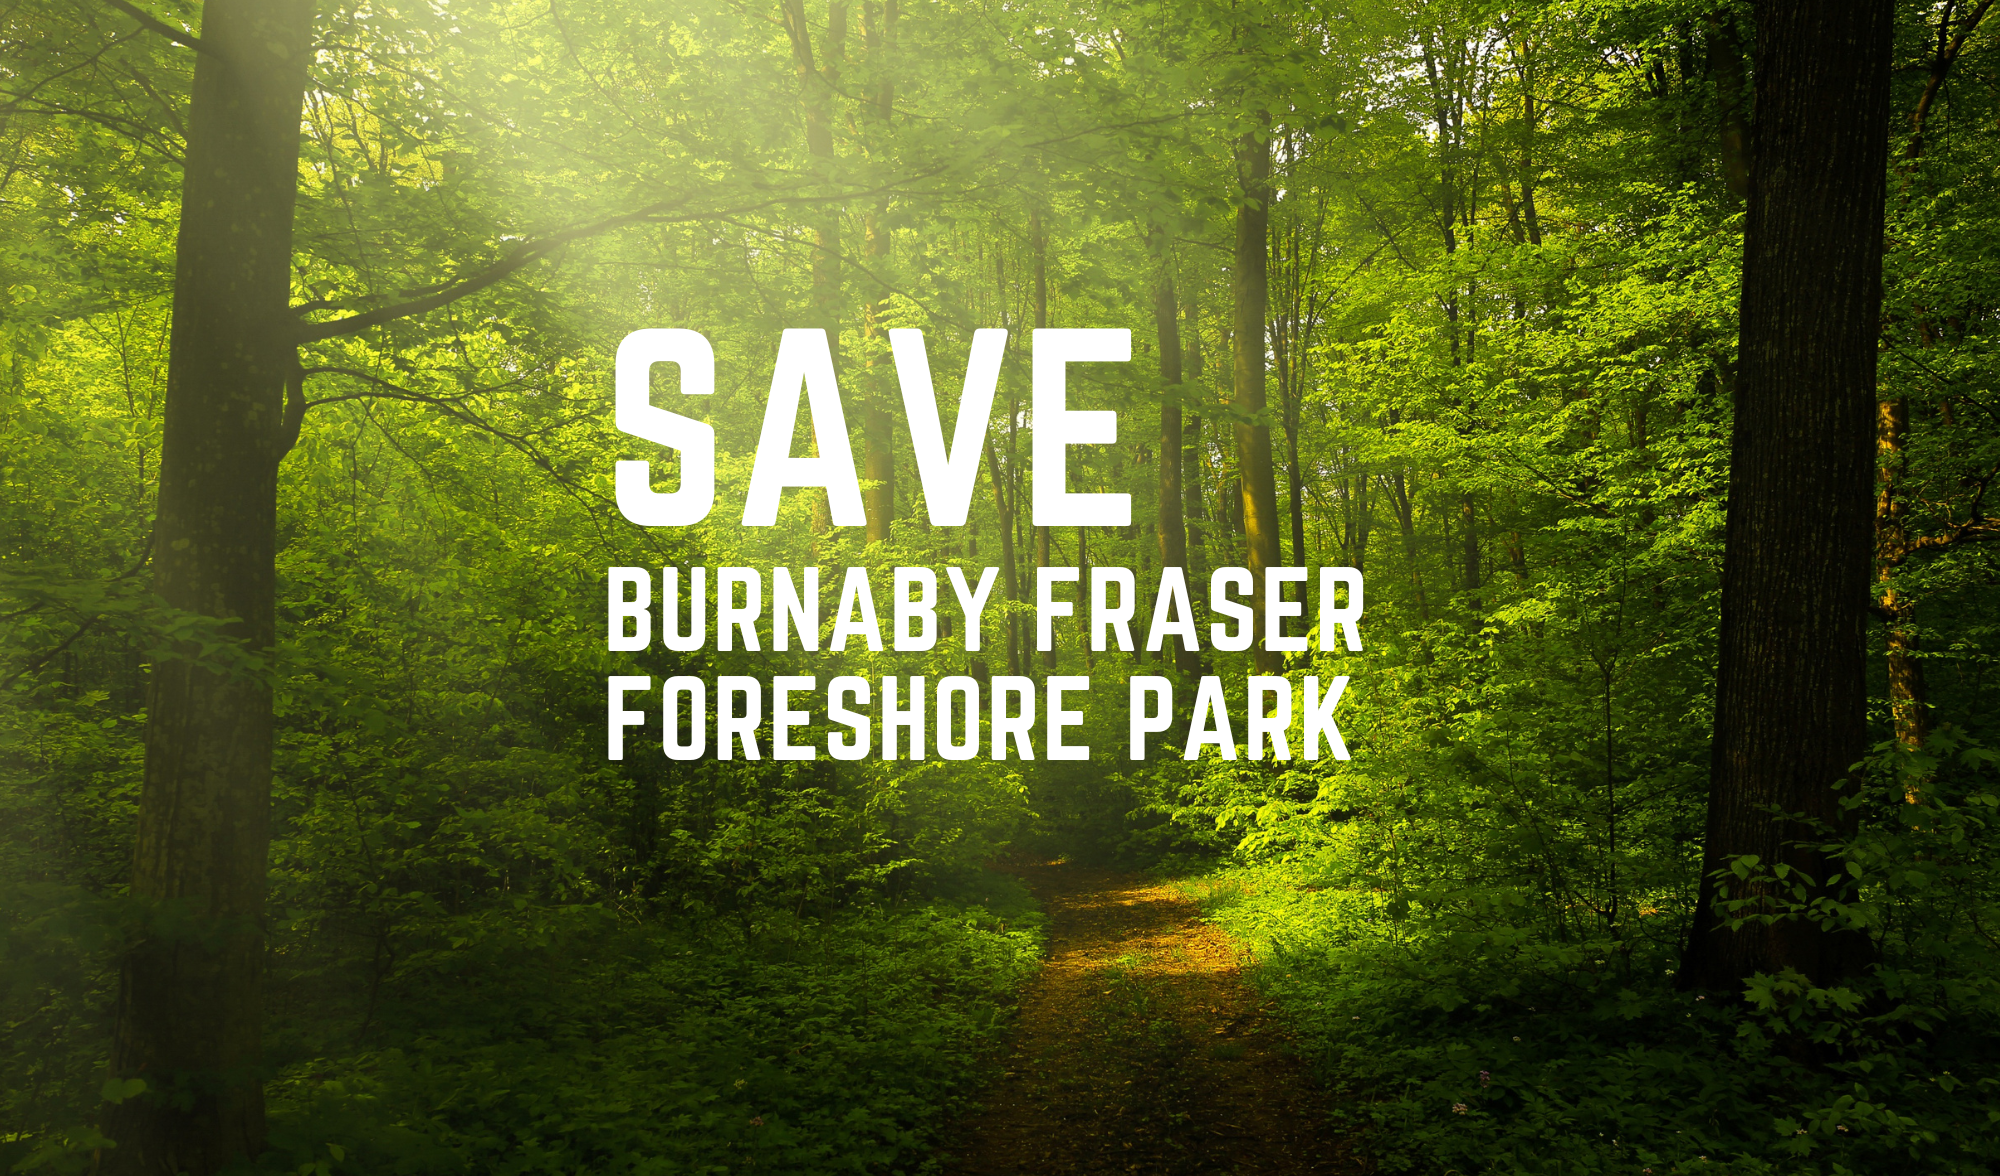 Saving Burnaby Fraser Foreshore Park from turning into a Waste Facility